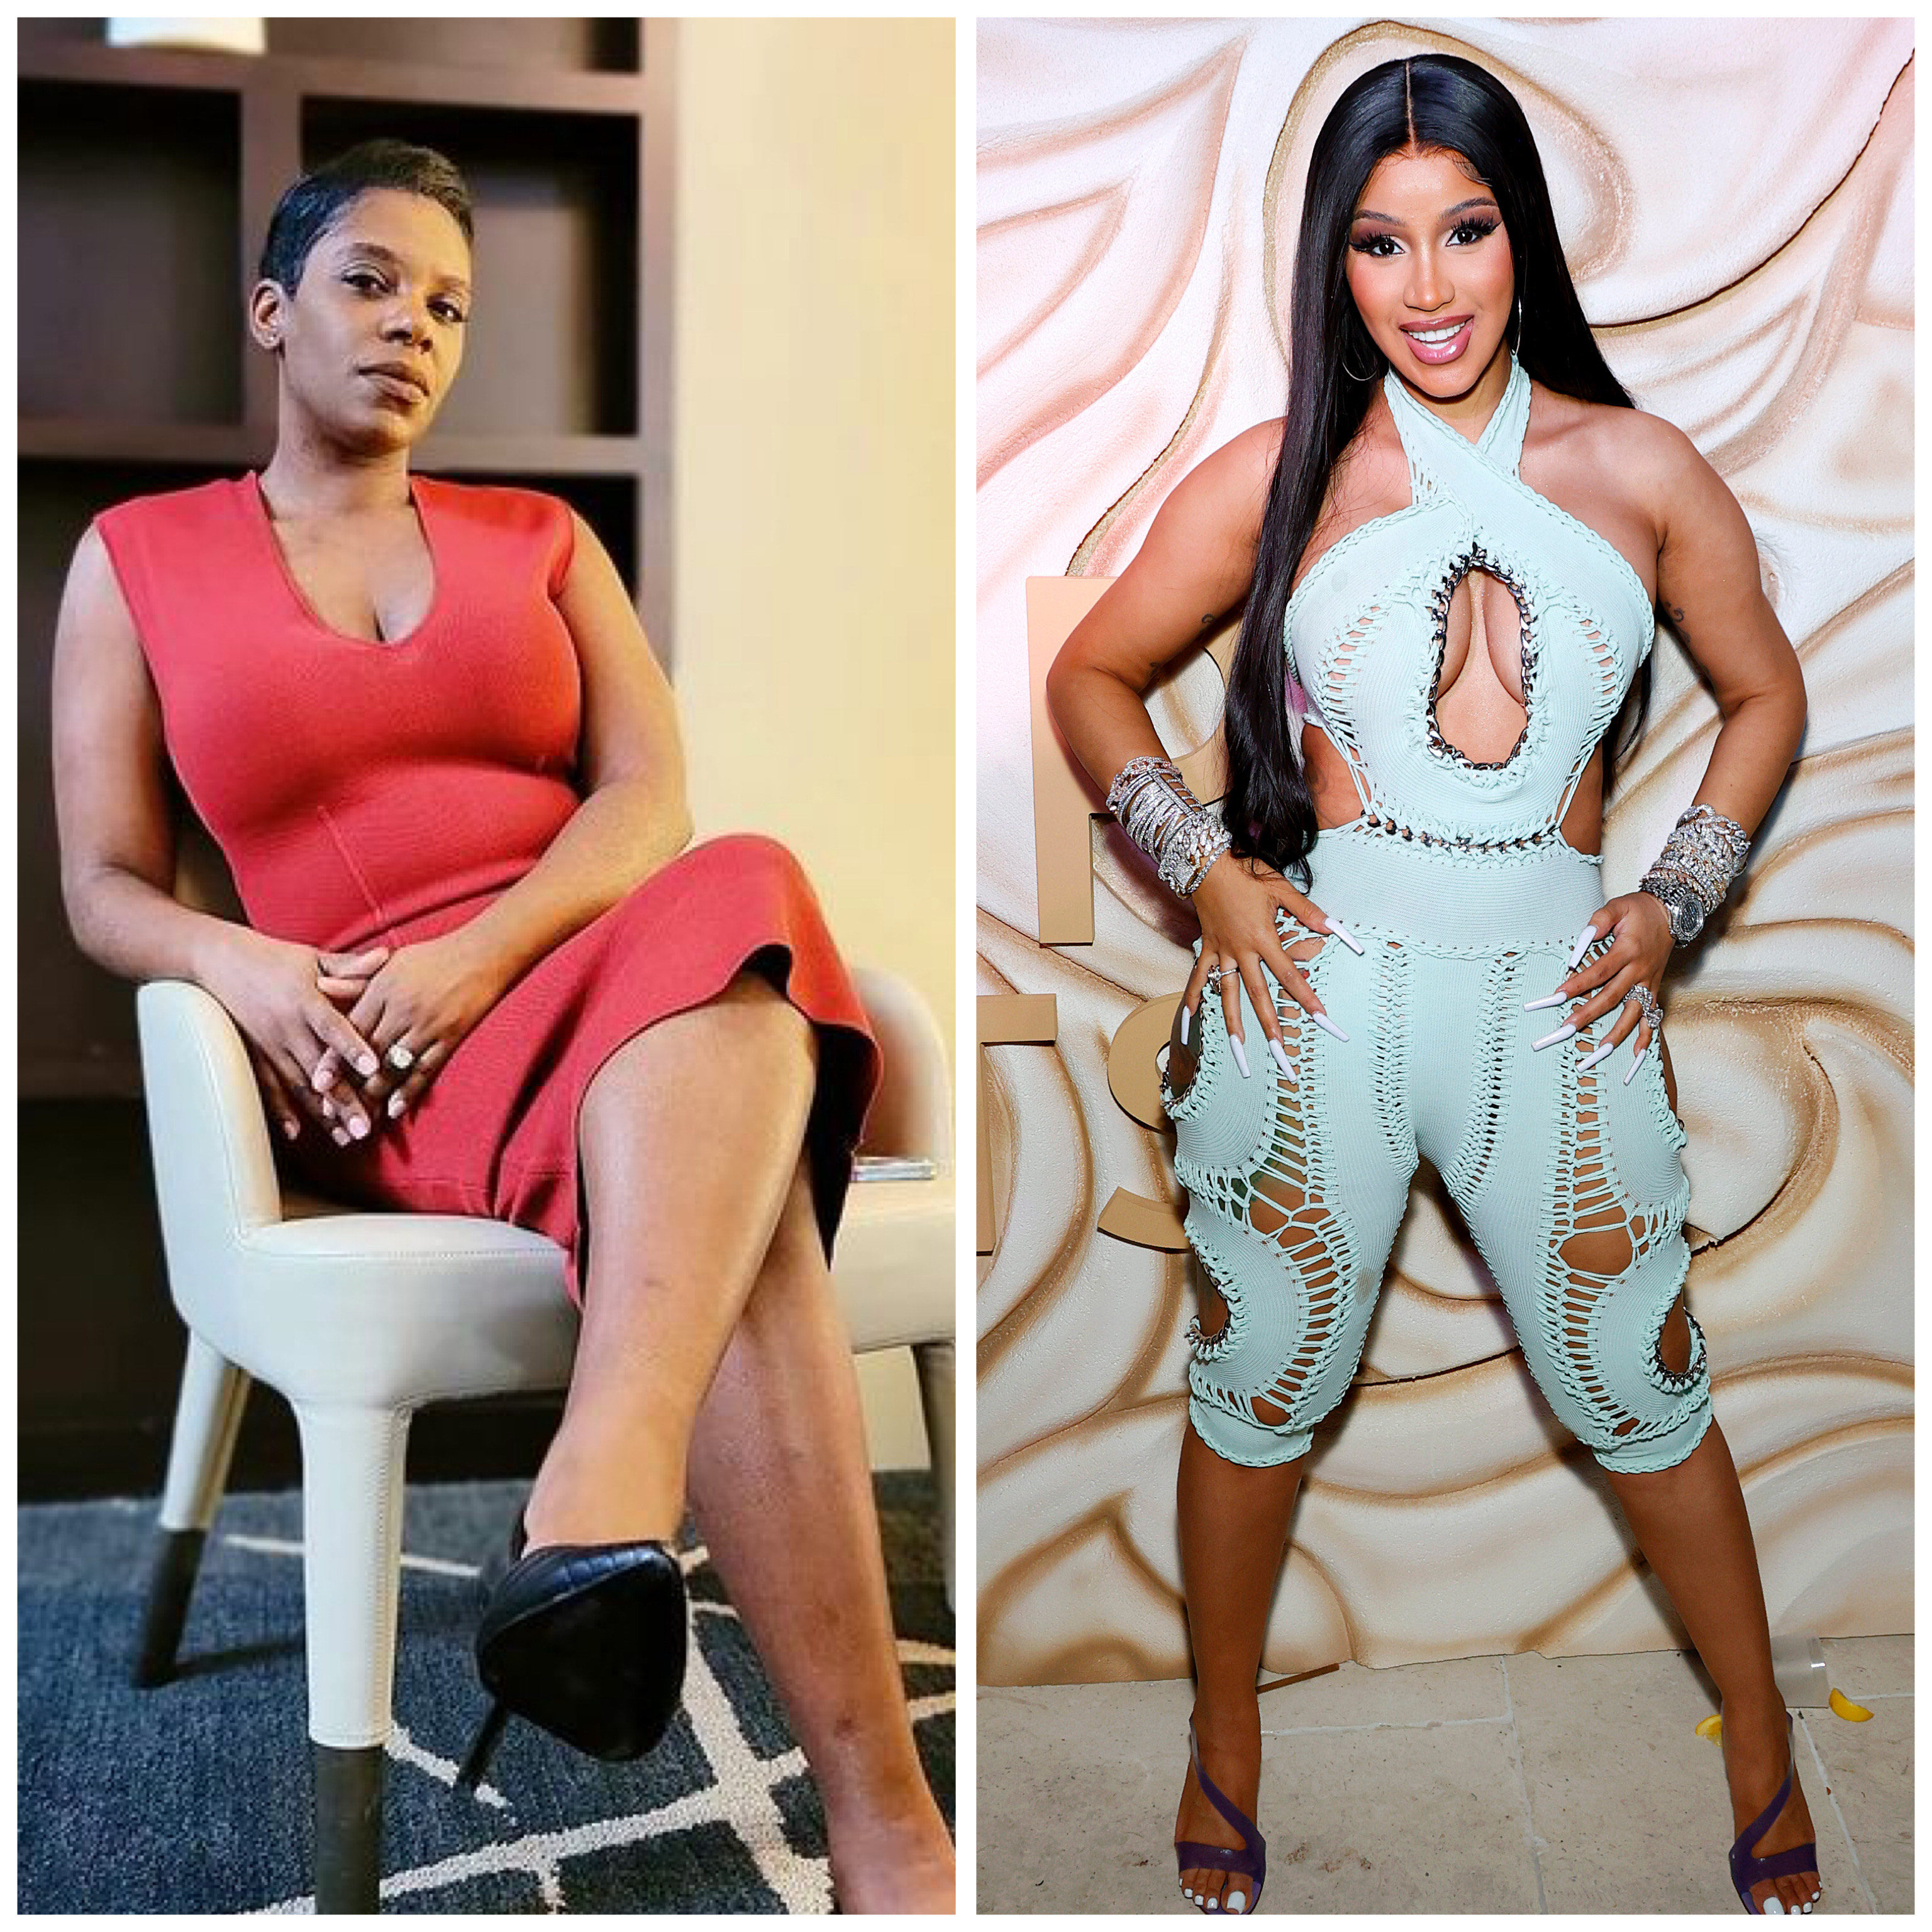 [VIDEO] Oop! Tasha K Says She “Ain’t Got It” When Asked If She Was Going To Pay Cardi B Over $3M As Judge Ordered thumbnail